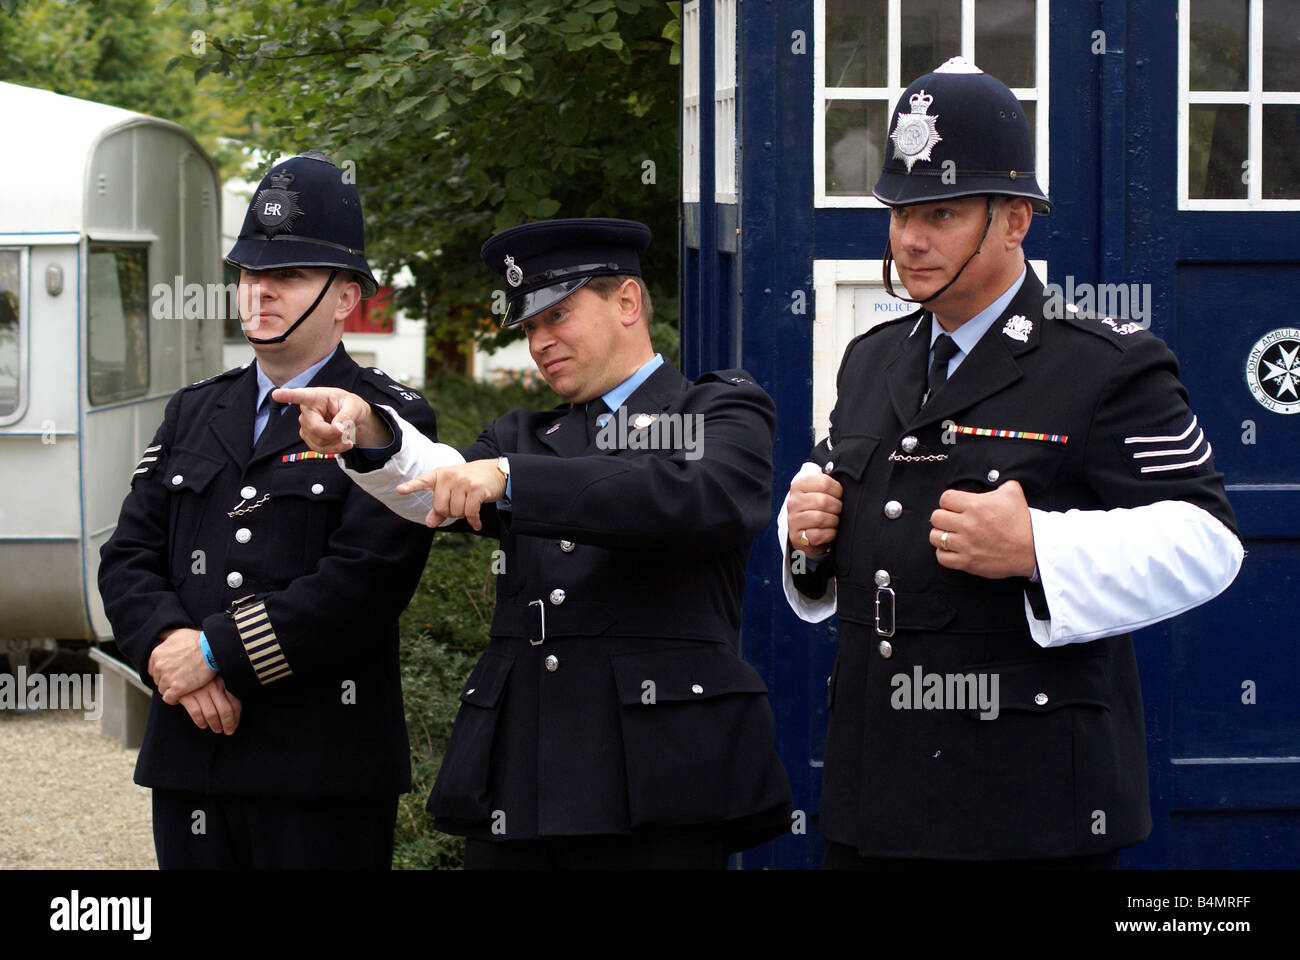 Bobbies on the beat Stock Photo